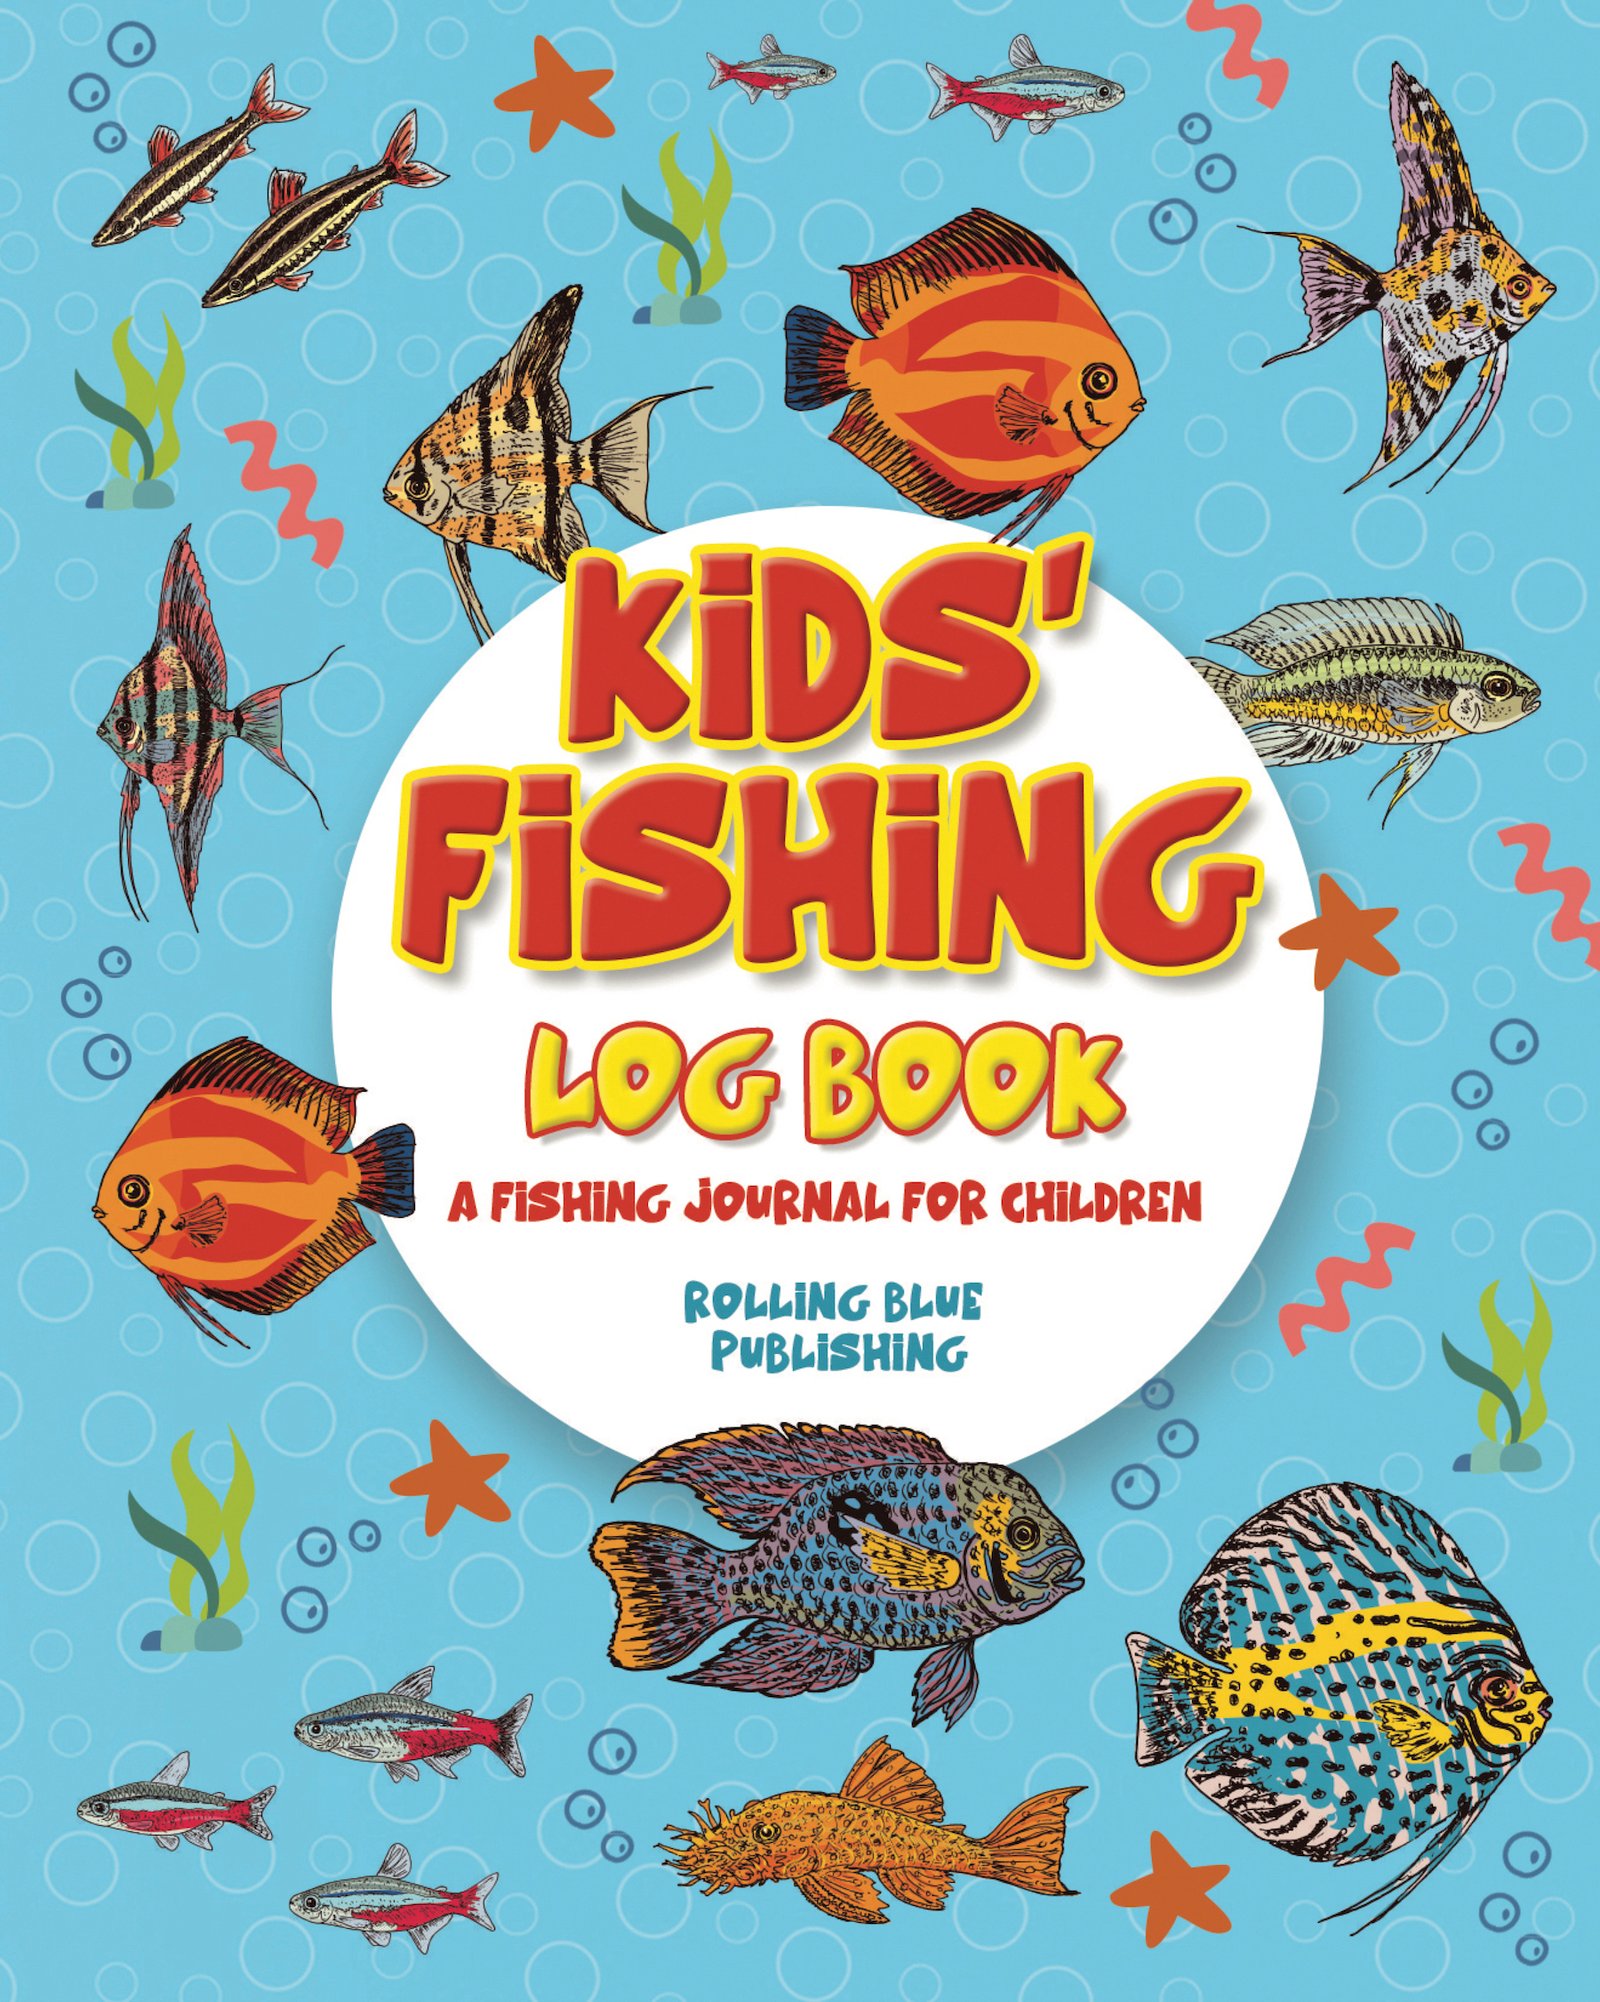 Fishing Log and Activity Book for Kids: 7x10 Inches, Over 100 Pages to Log Fishing Trips and Keep Your Little One Occupied. [Book]